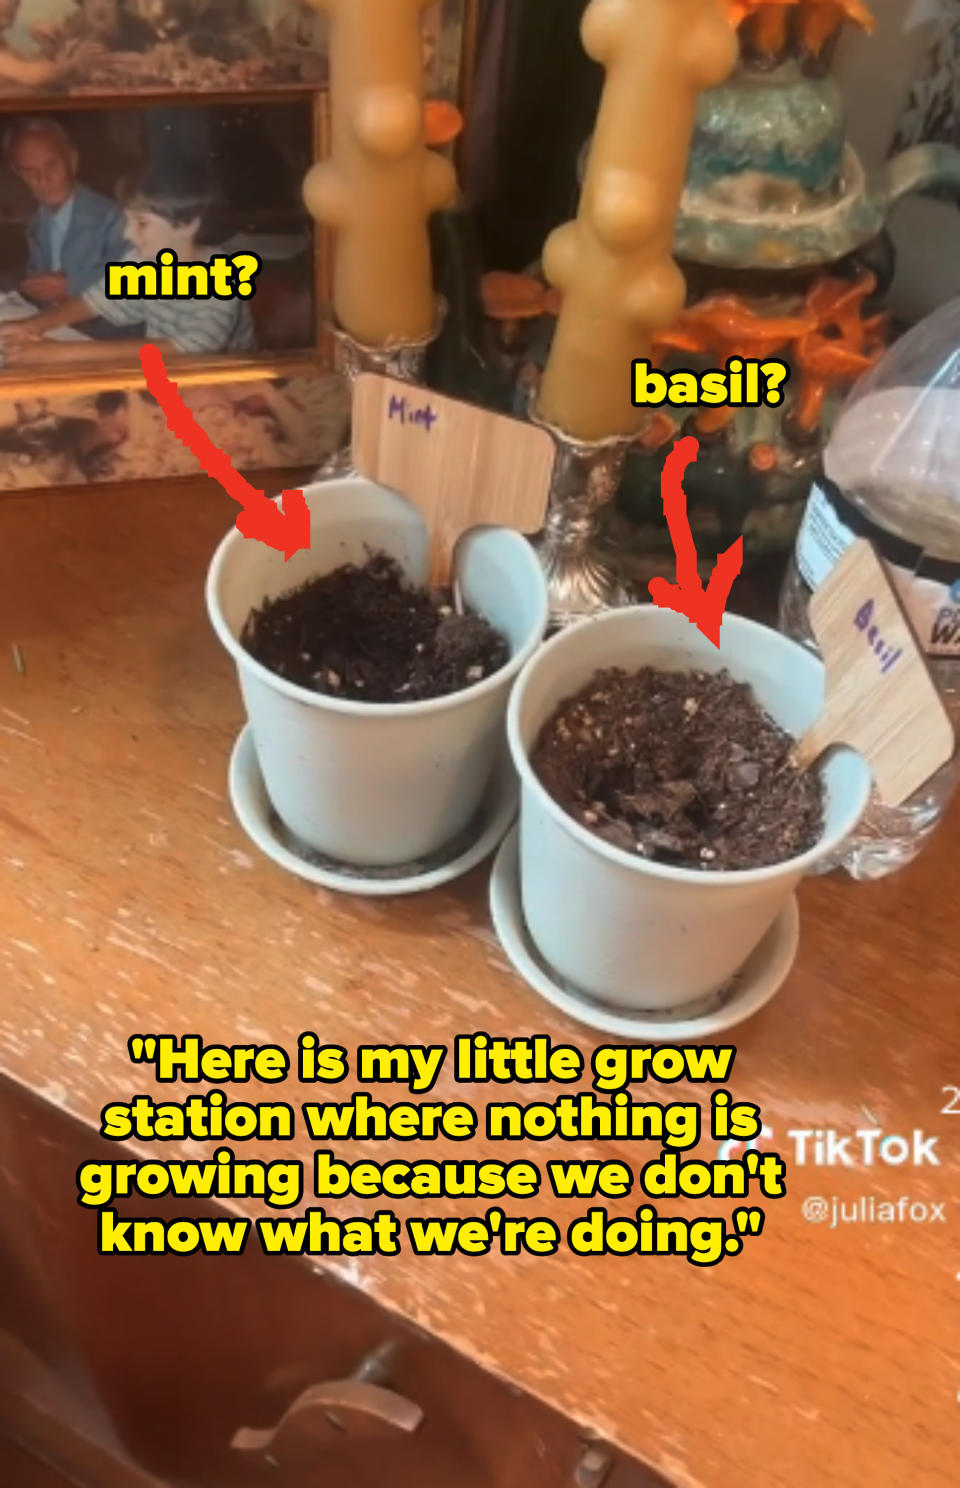 Two pots of soil sit next to each other with the one of the left labeled "mint" and the one on the right labeled "basil"